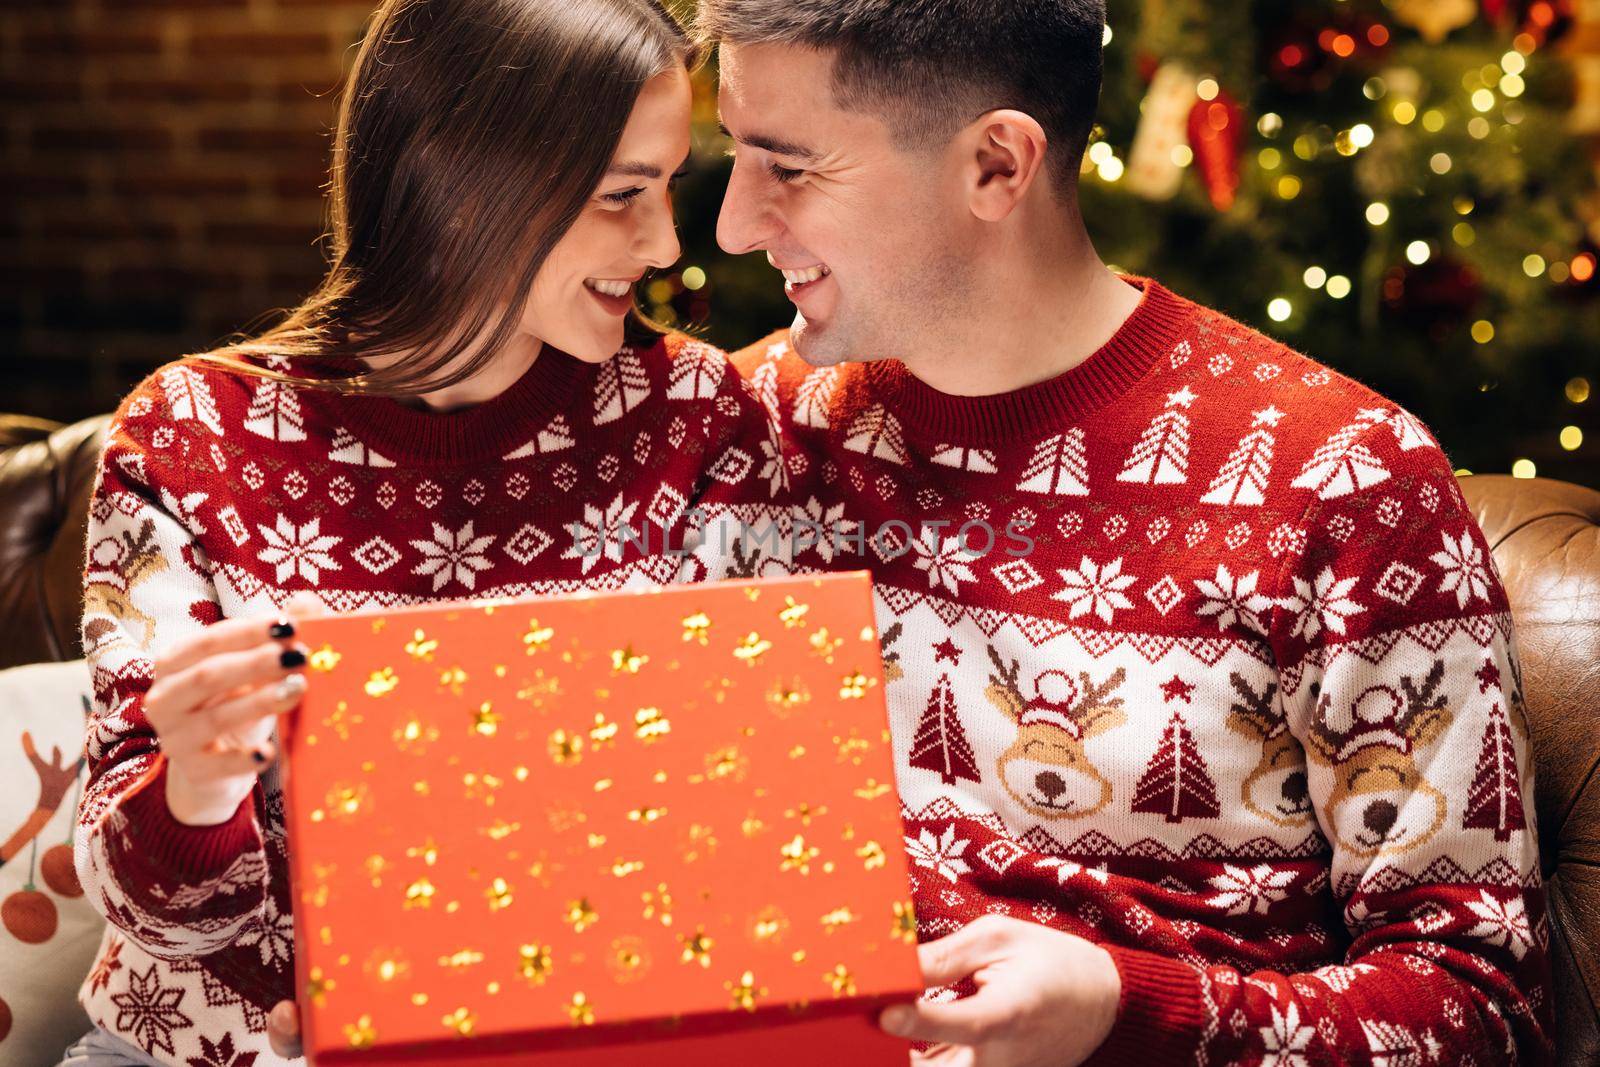 Happy man is making christmas gift to his beloved woman. Woman is surprised and excited after opening received gift box. Concept of holidays, romance, surprise. Holiday miracle.